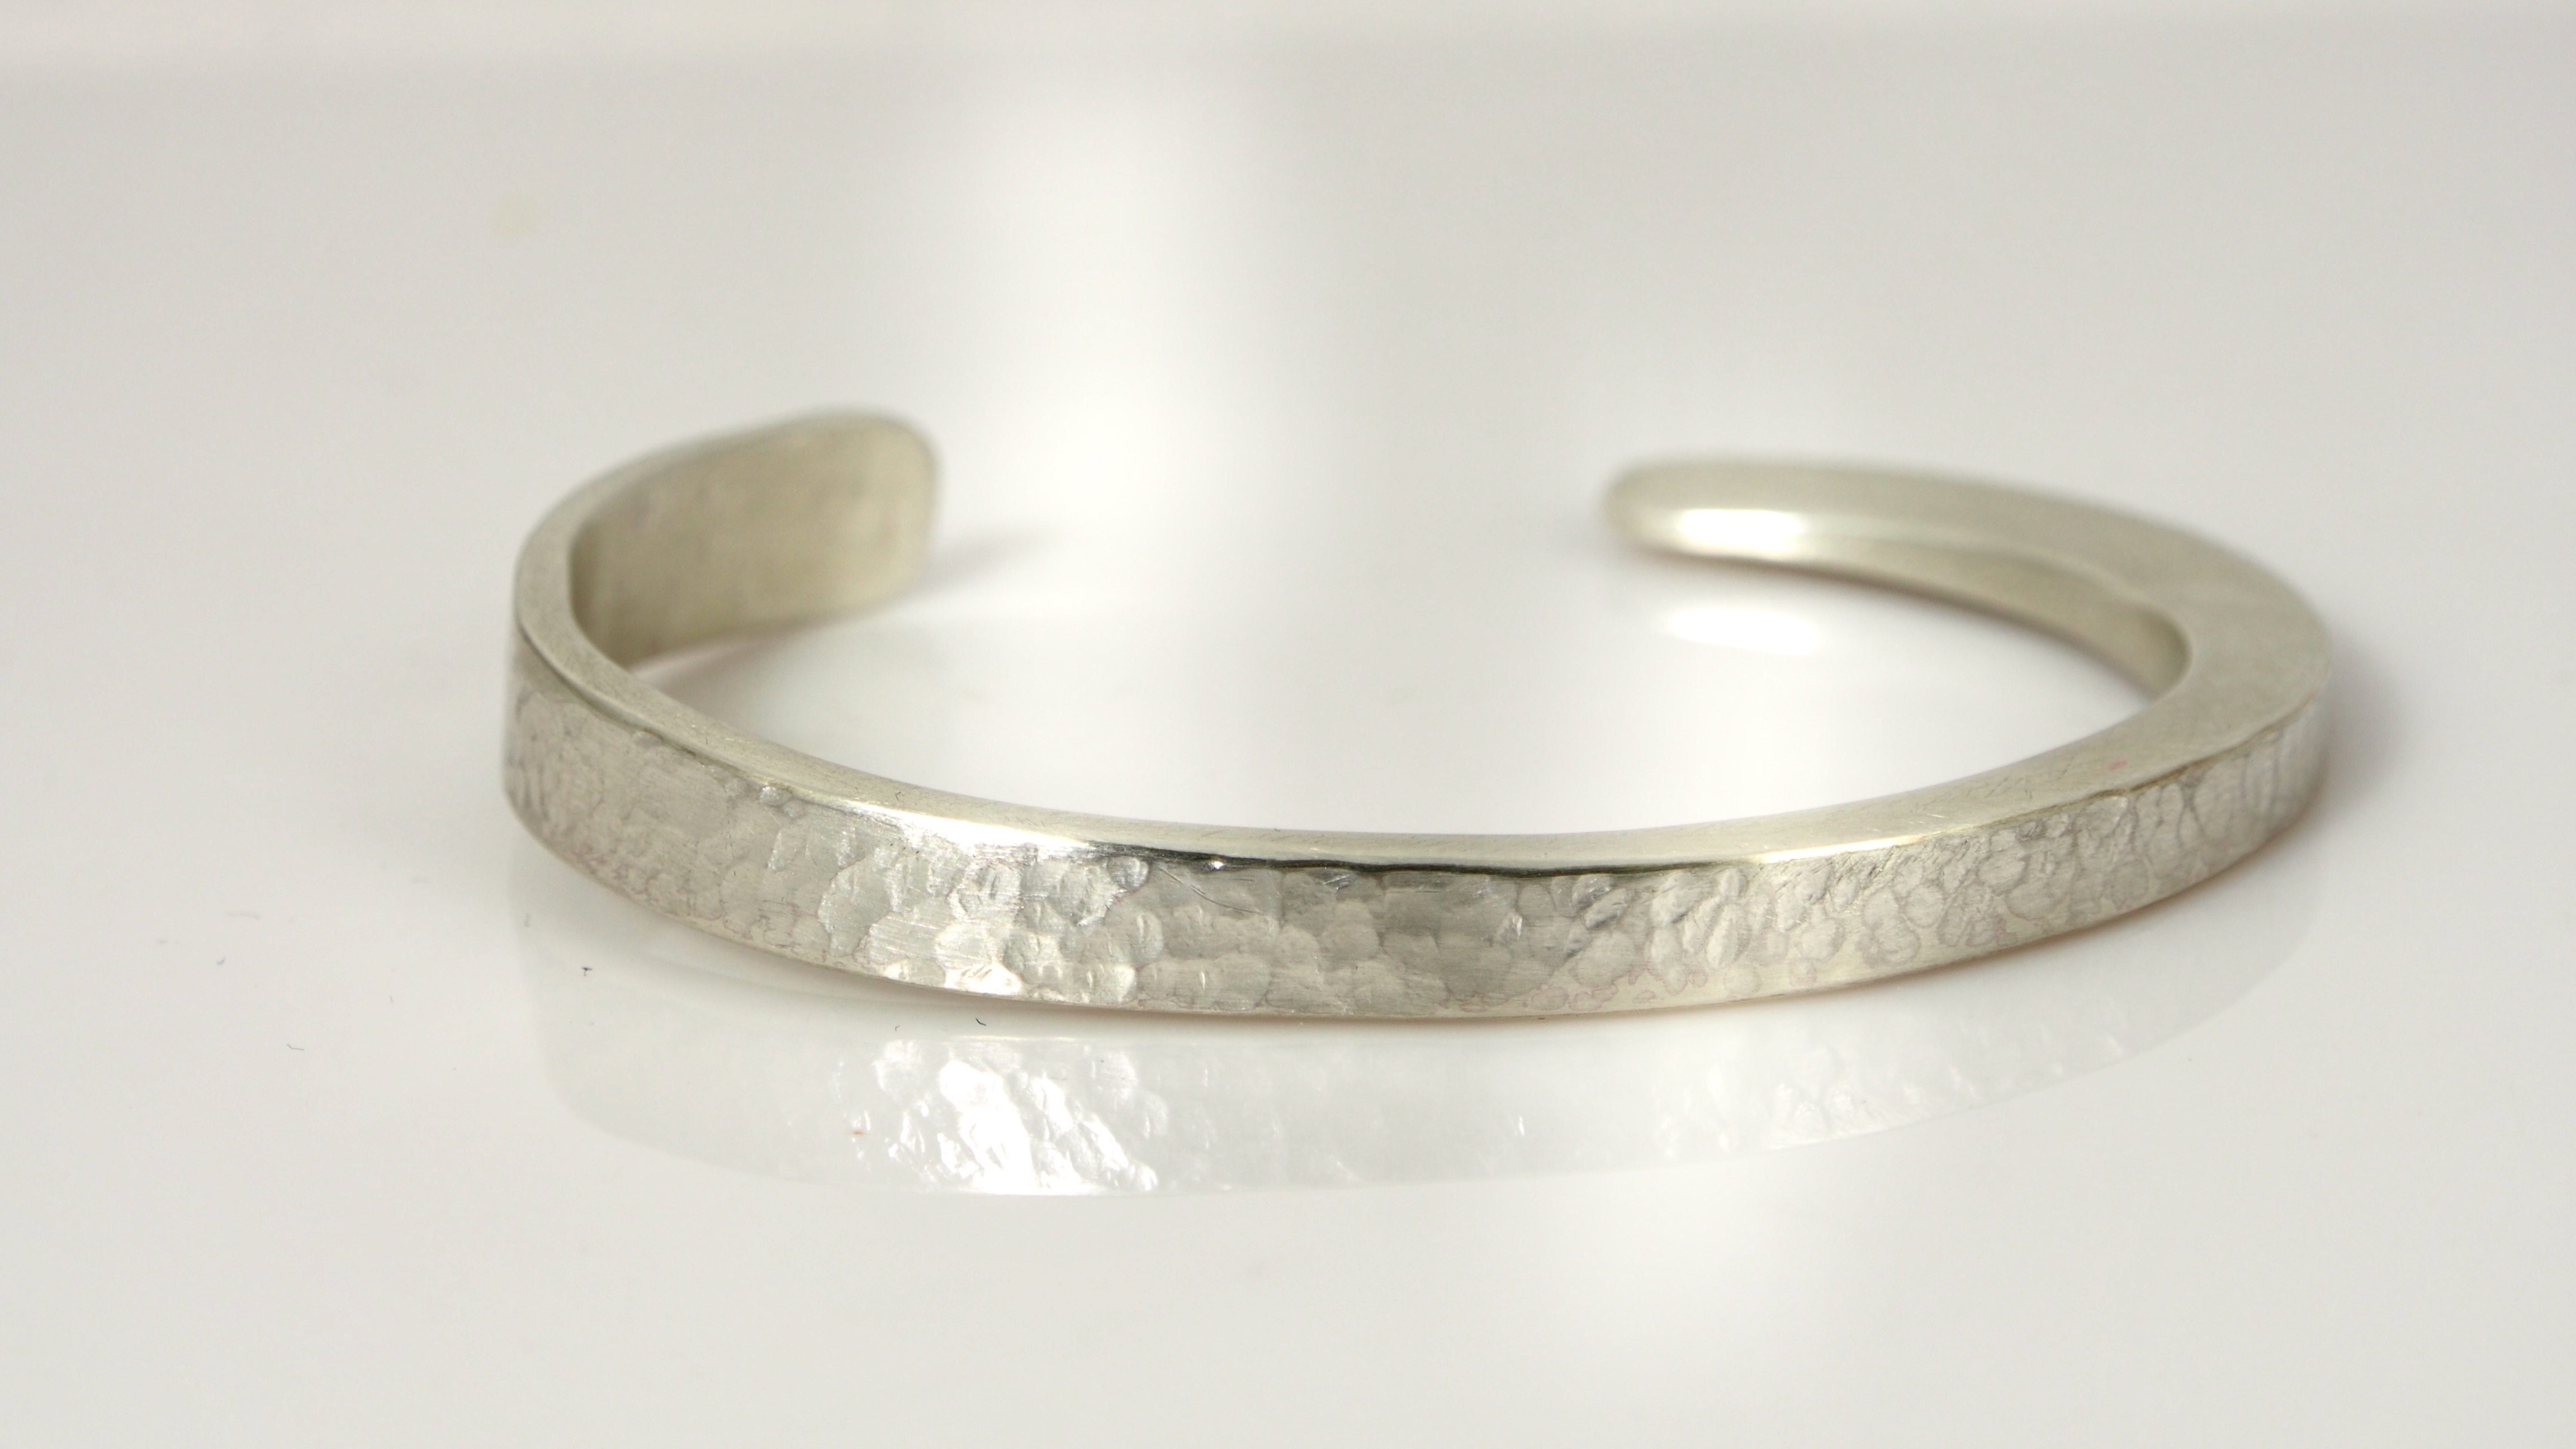 Textured Silver Bracelet (medium) - Hand Forged Sterling Silver